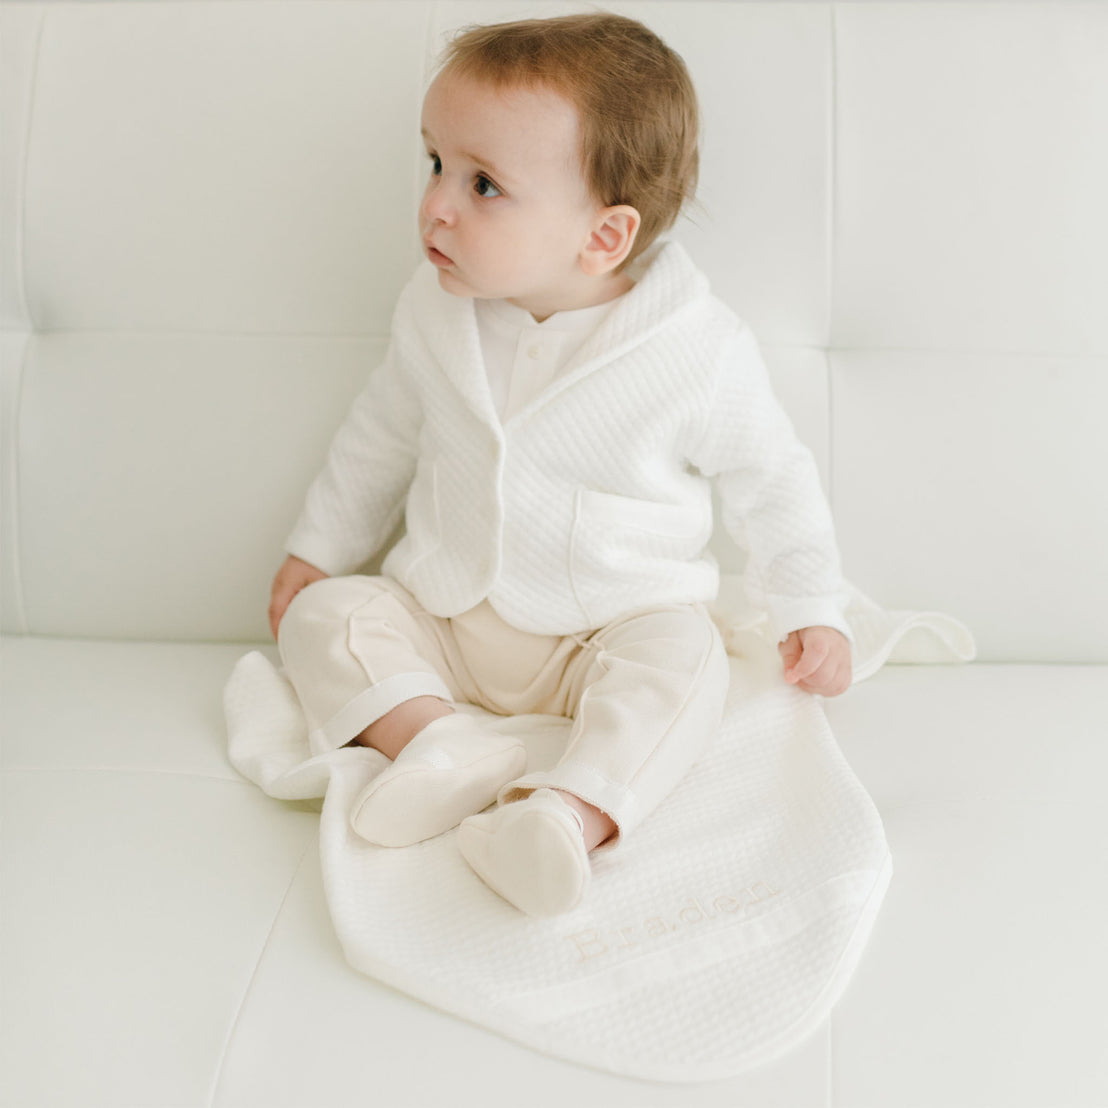 Baby boy sitting on a white couch with a white quilt blanket. He is wearing the Braden 3-Piece Suit